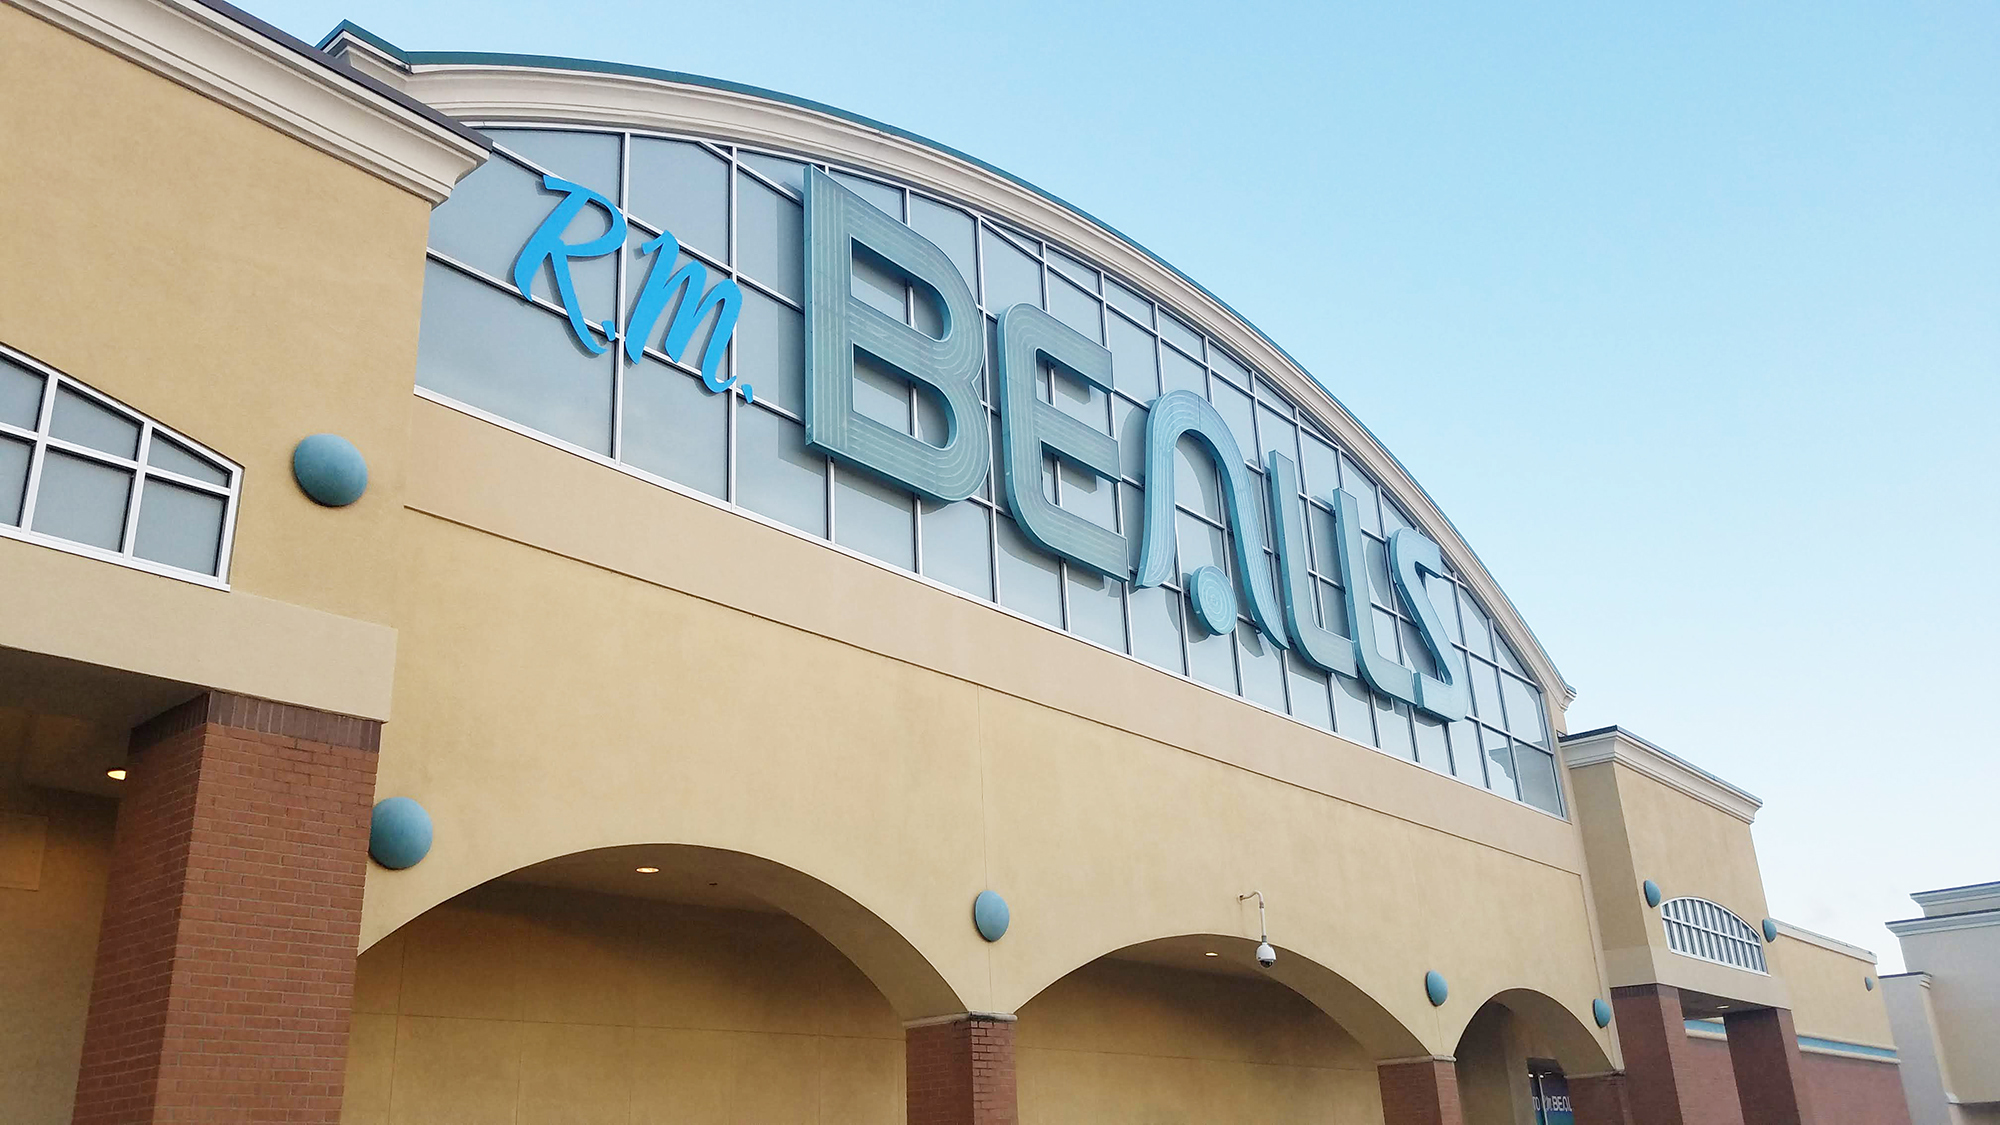 R.M. Bealls focused on selling items at “a consistent lower price.”